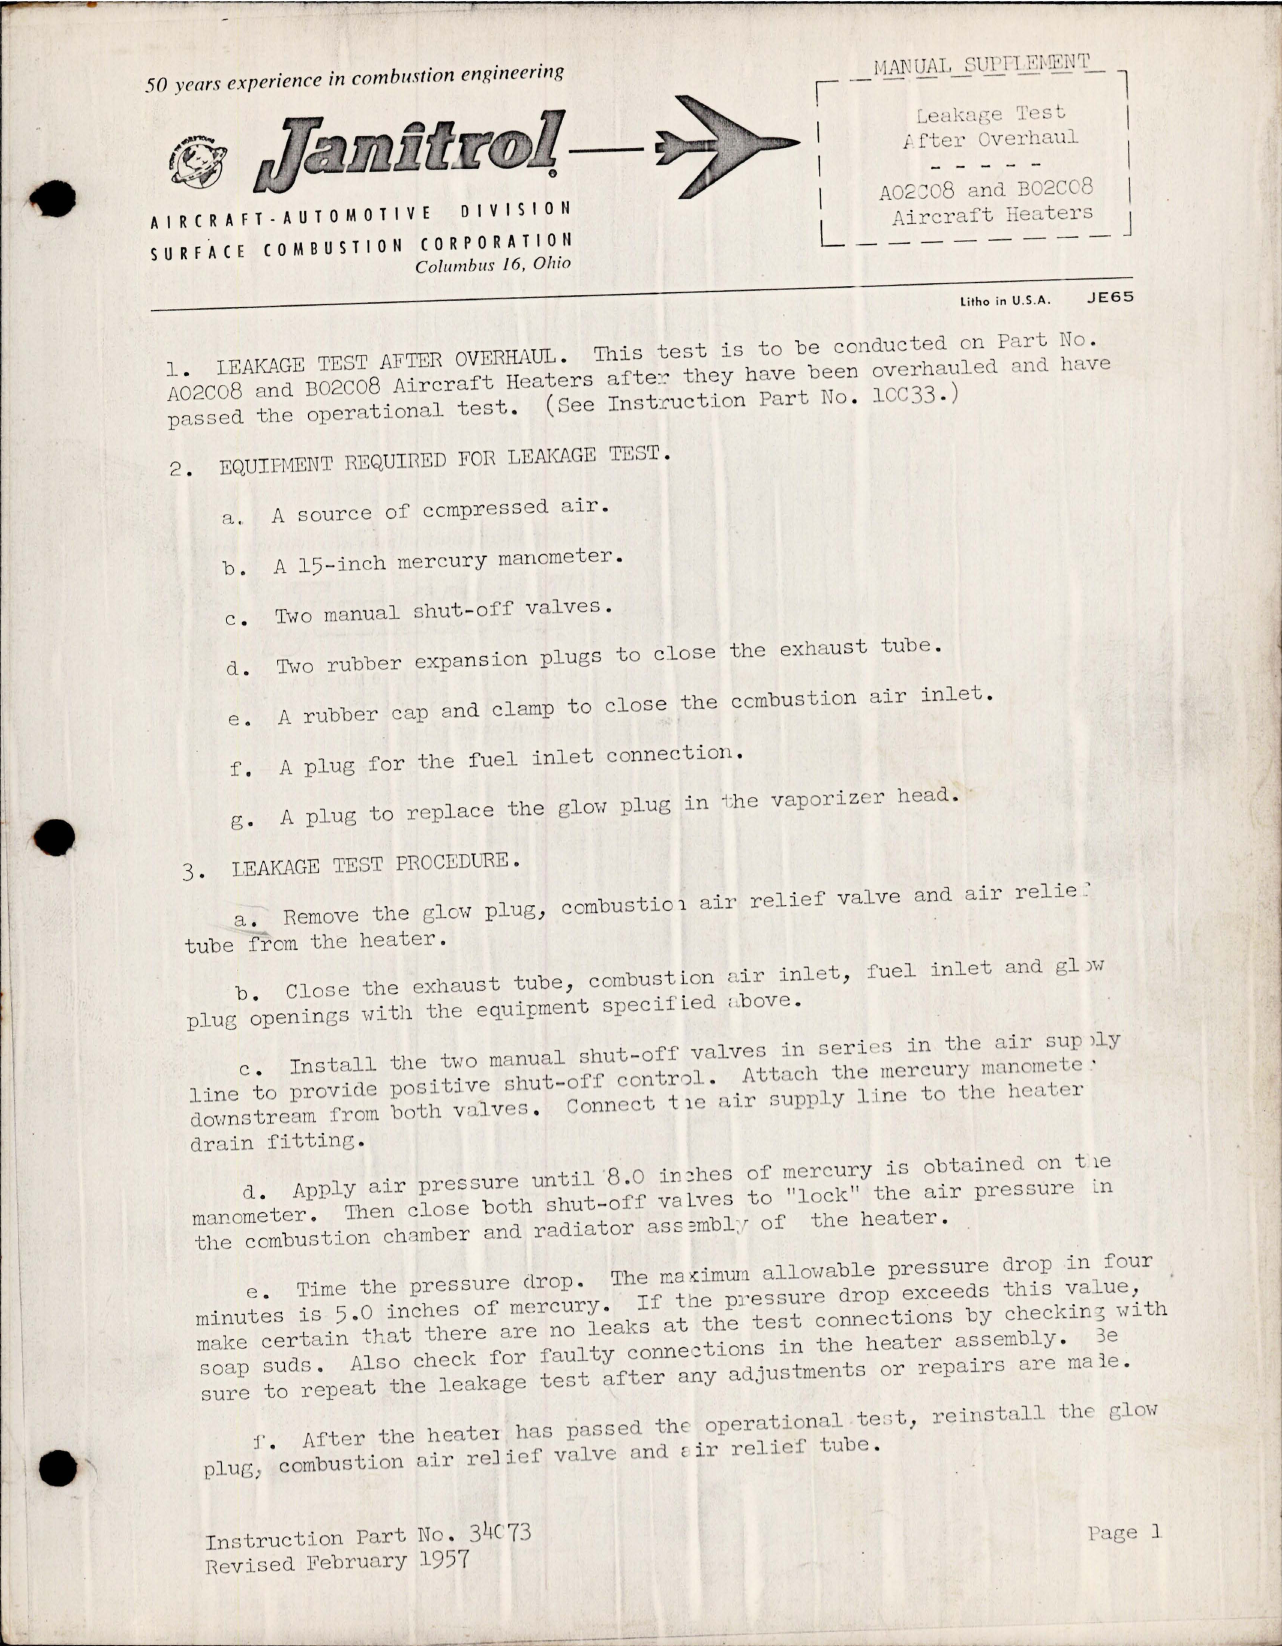 Sample page 1 from AirCorps Library document: Supplement to Aircraft Heaters for Leakage Test after Overhaul - A02C08 and B02C08